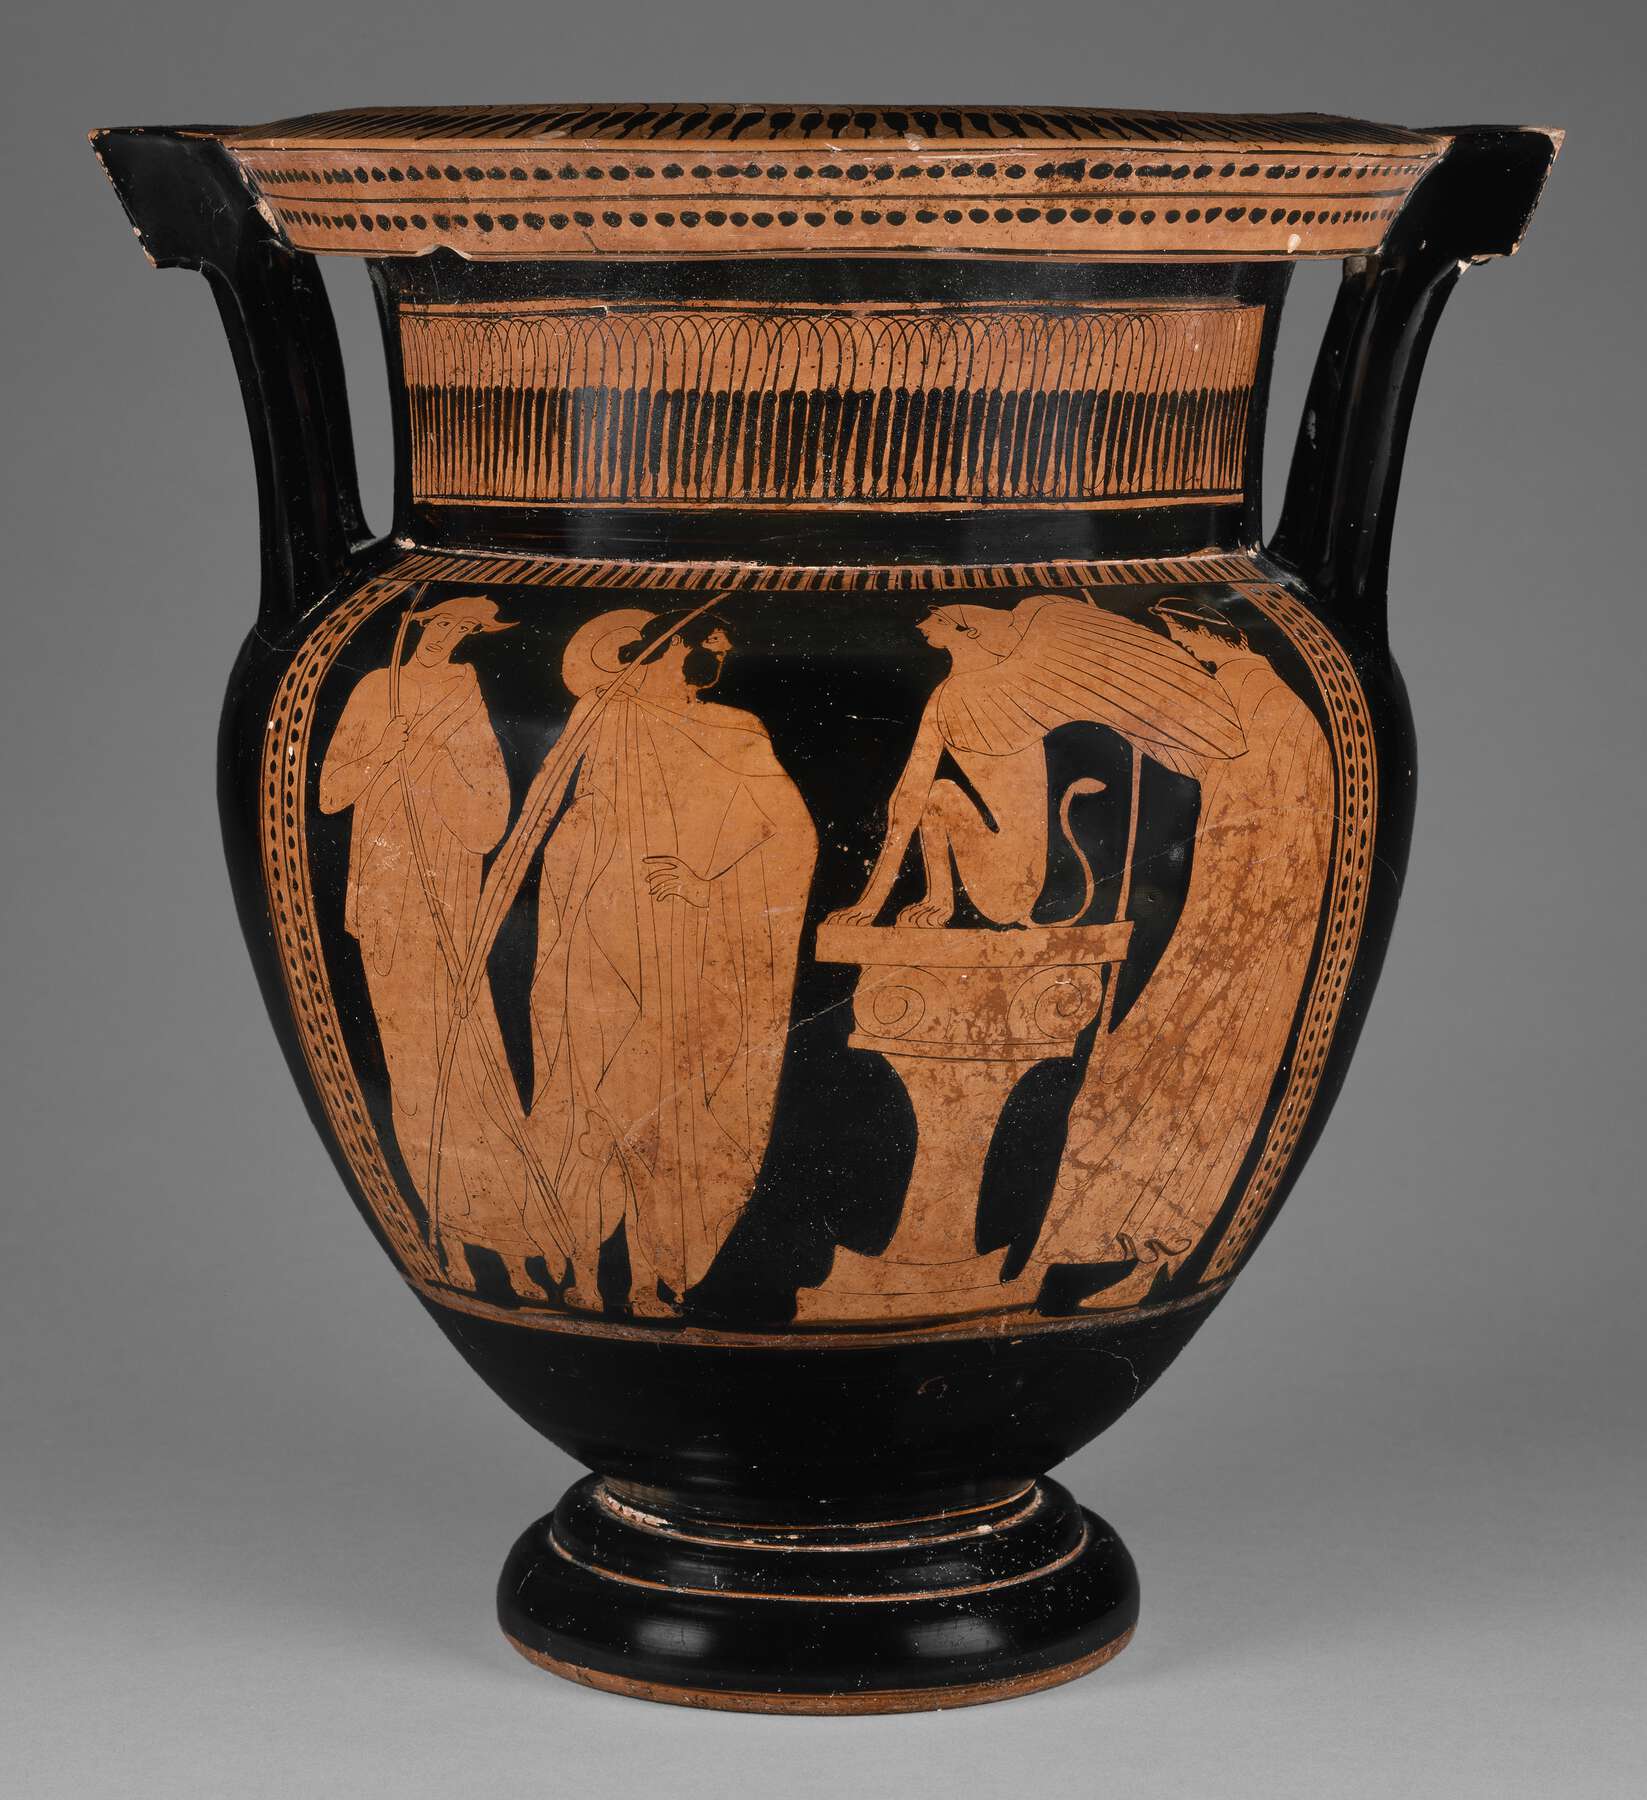 One view of a vase, with the body decoration depicting three people and a griffin(?) on a pedestal